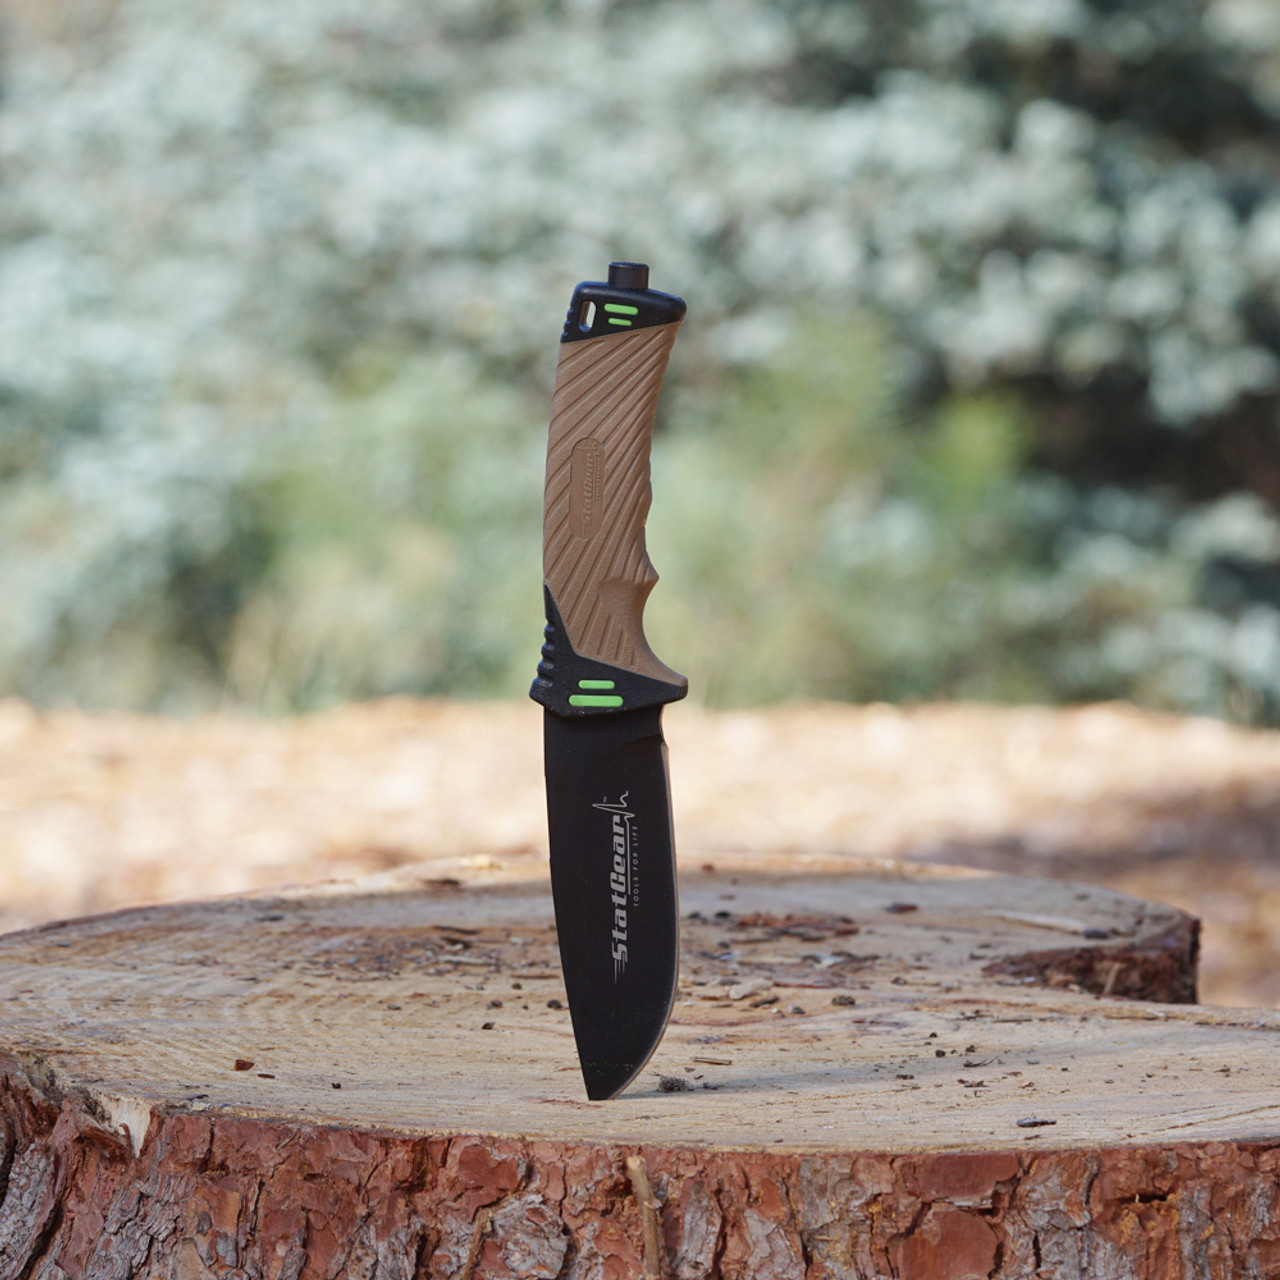 Get Your Surviv-All Survival Knife from StatGear - Free Shipping in US